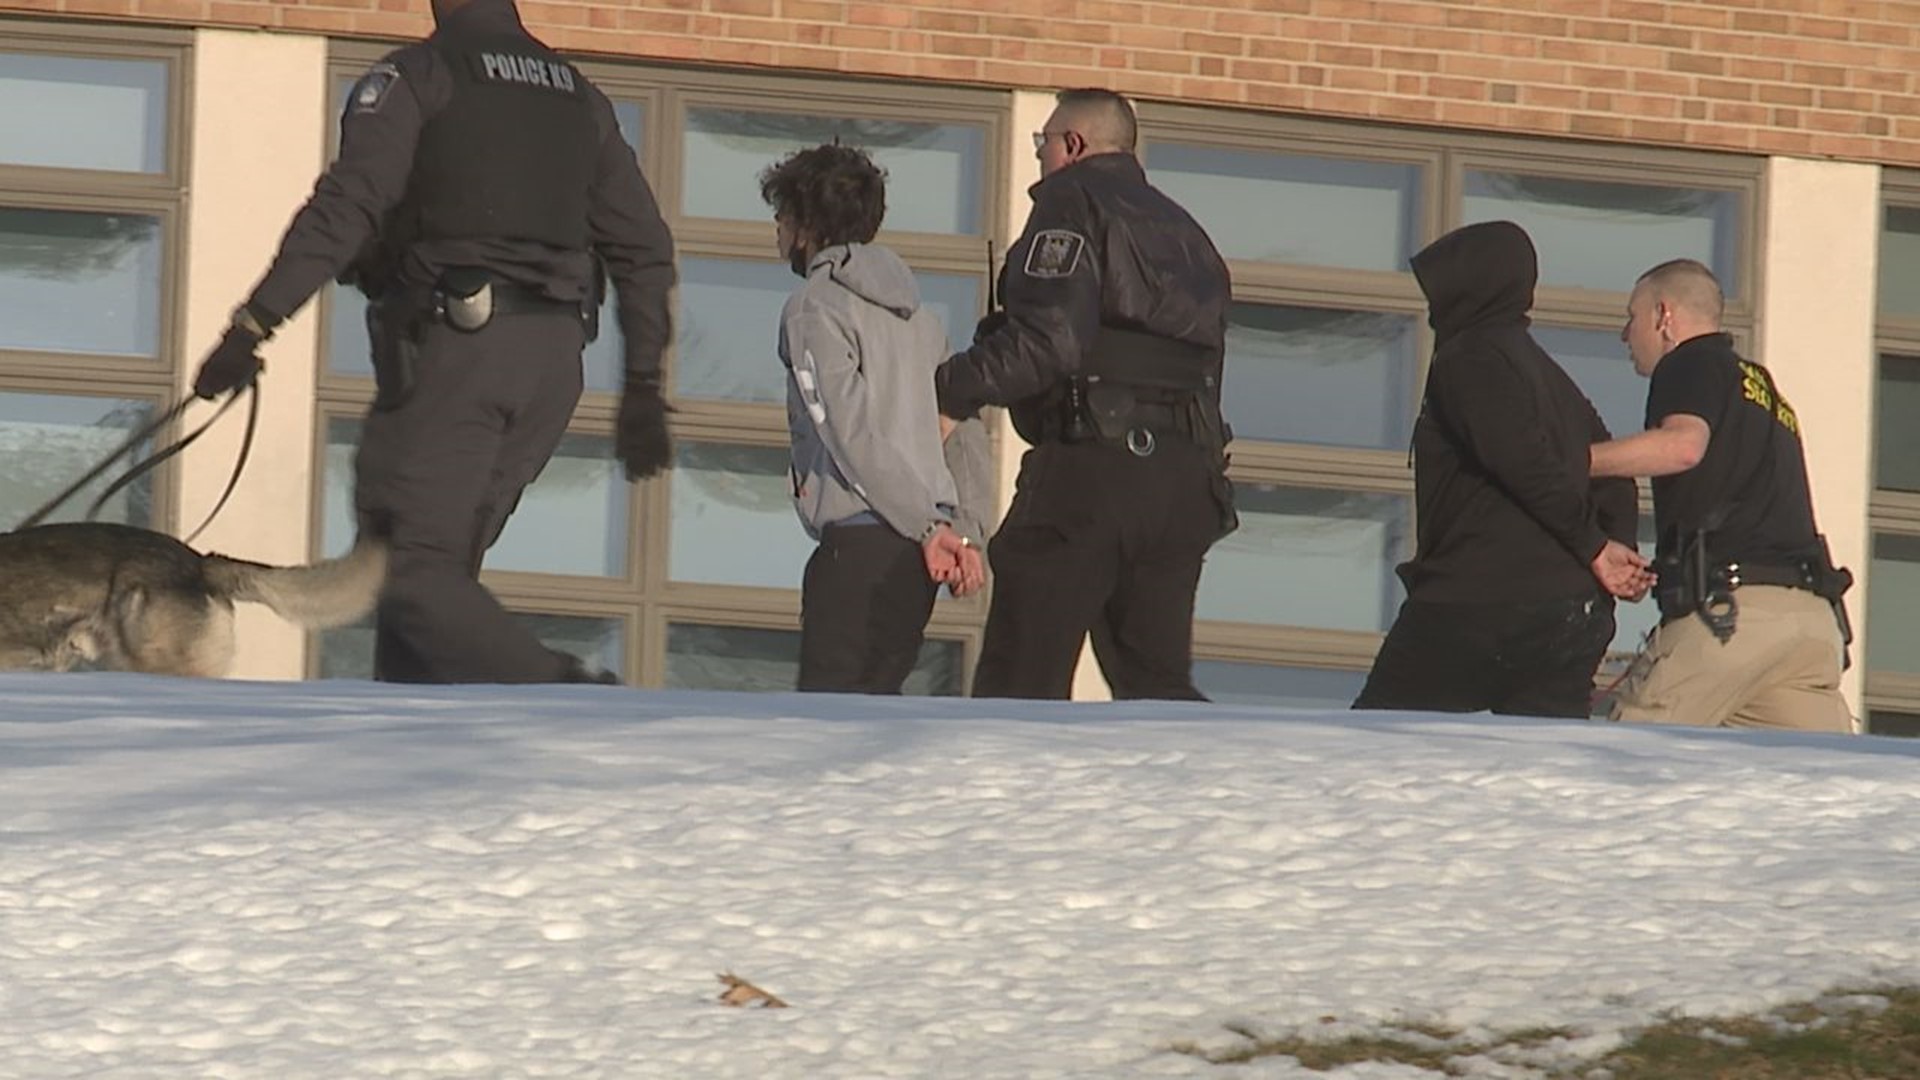 The Central Dauphin School District will convene tonight for its first board meeting since a 17-year-old boy brought a gun into school.